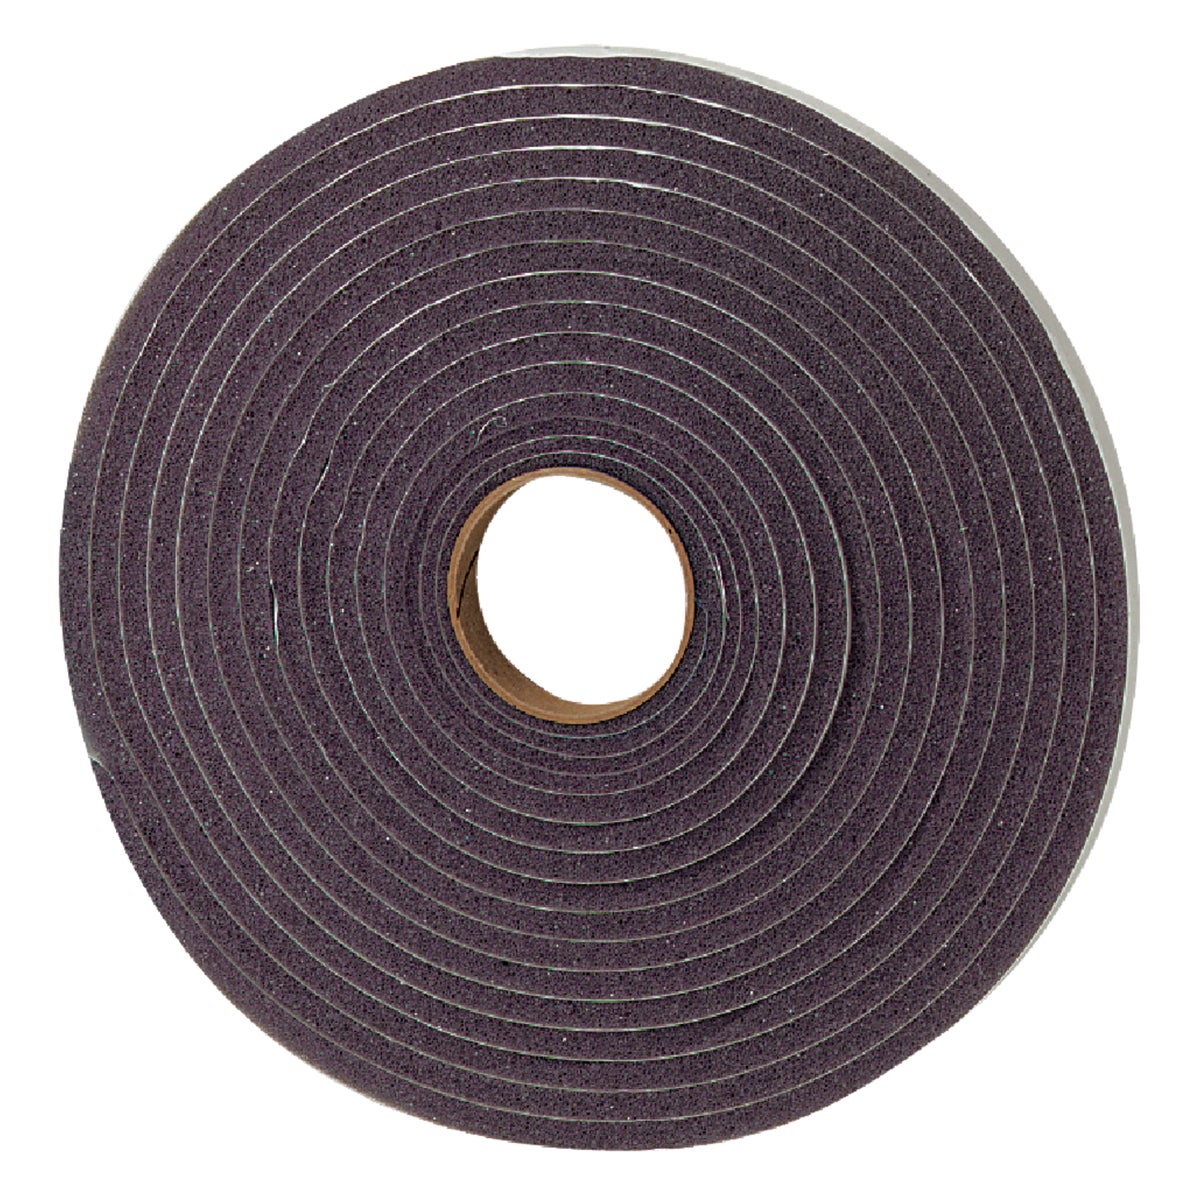 Item 270881, Self-sticking resilient foam tape that compresses flat to form a tight seal